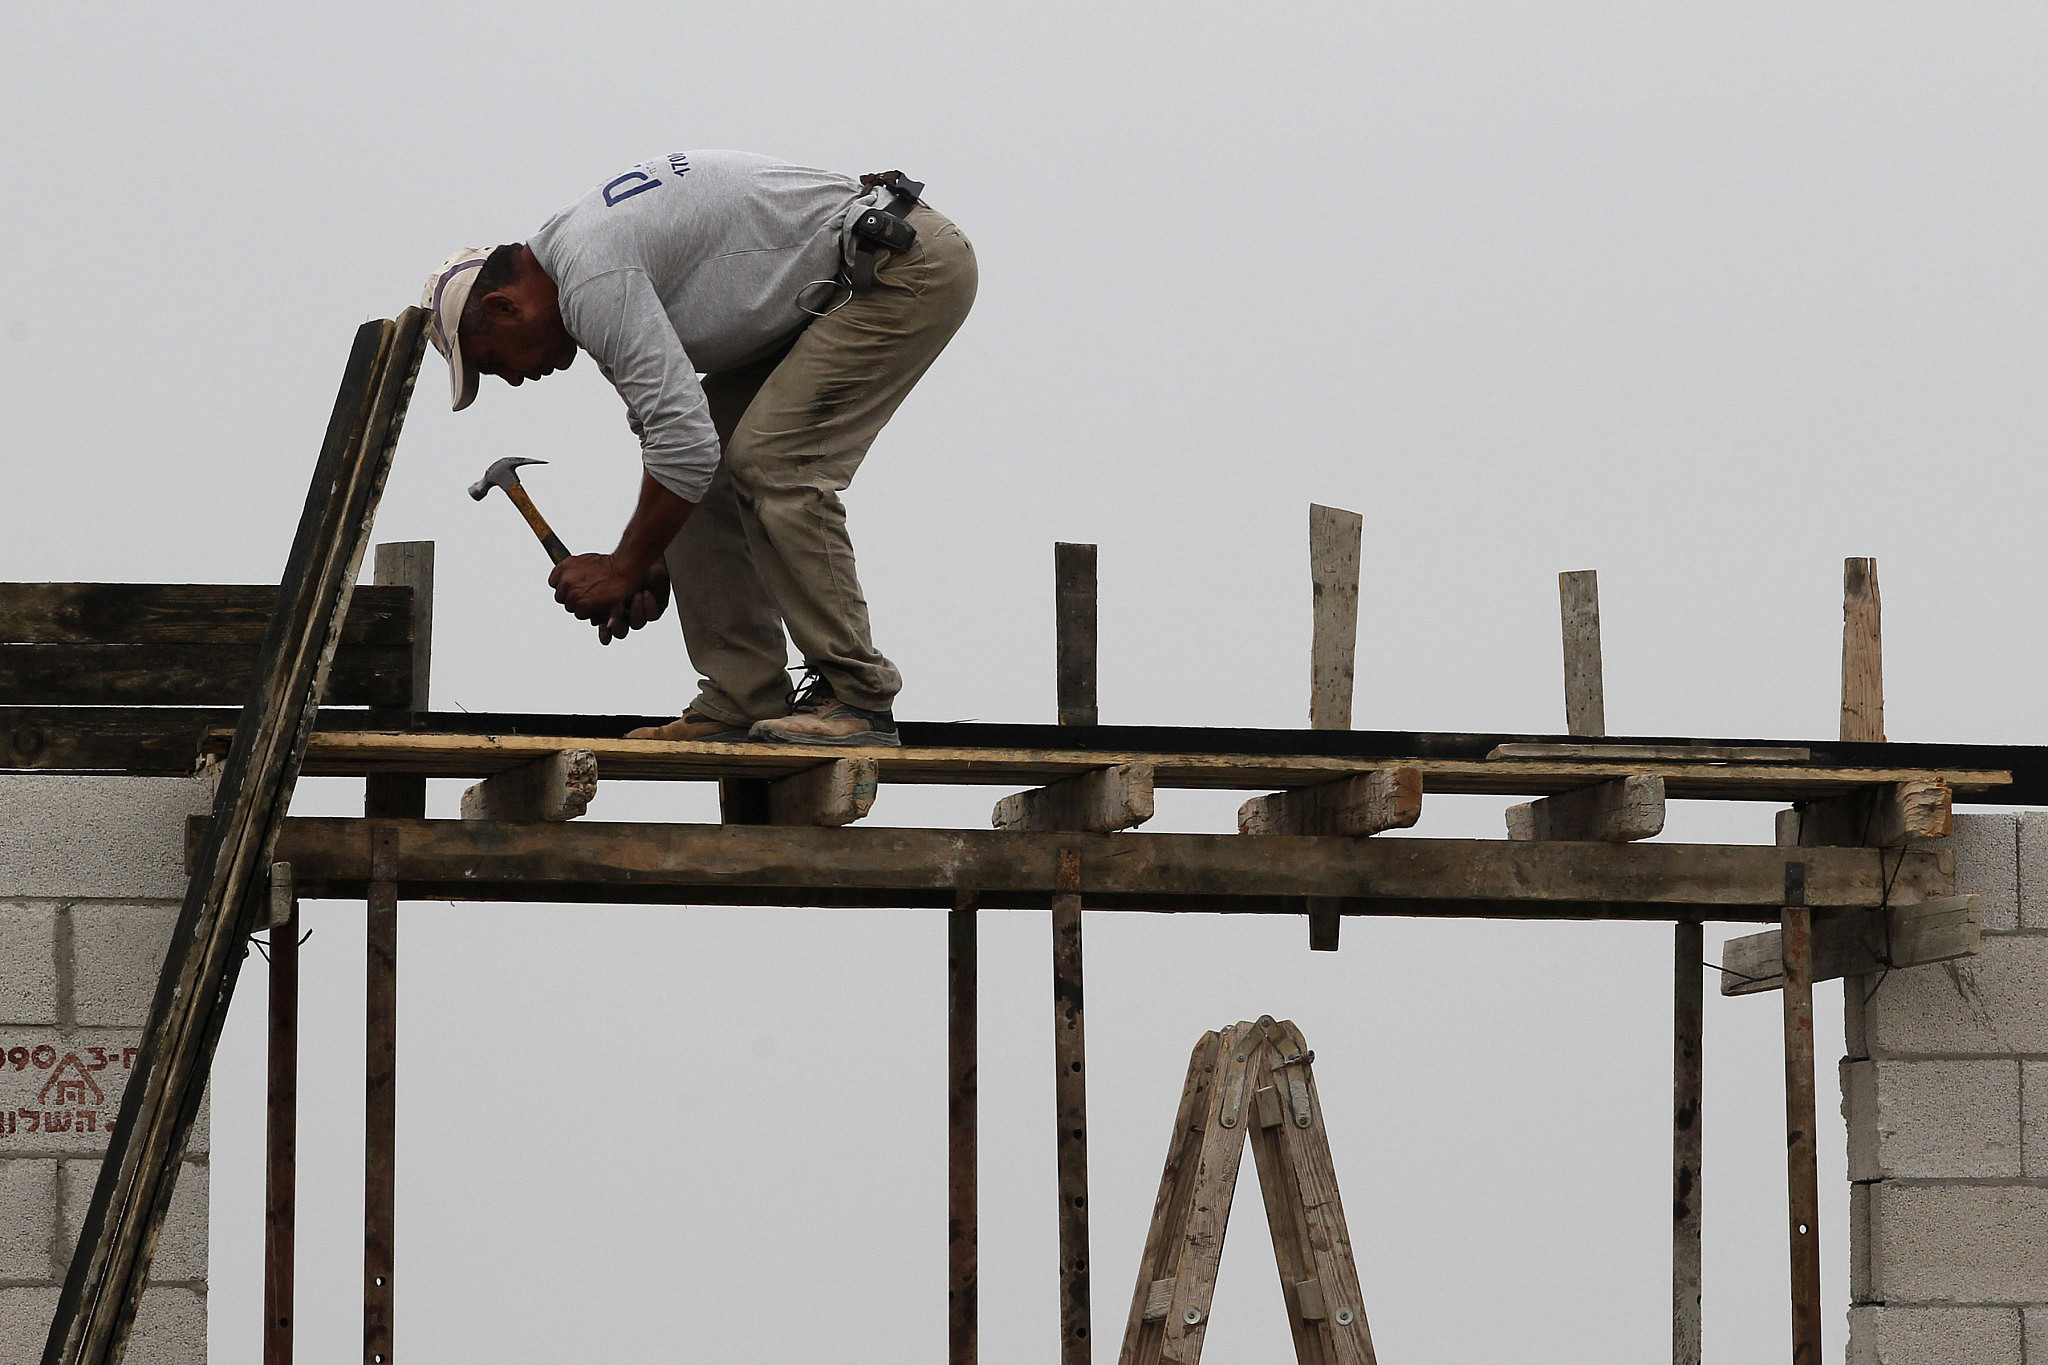 A Palestinian construction laborer works on the expansion of the Jewish settlement of Tzufim, near the West Bank town of Qalqilya, October 31, 2012. (Nati Shohat/Flash90)